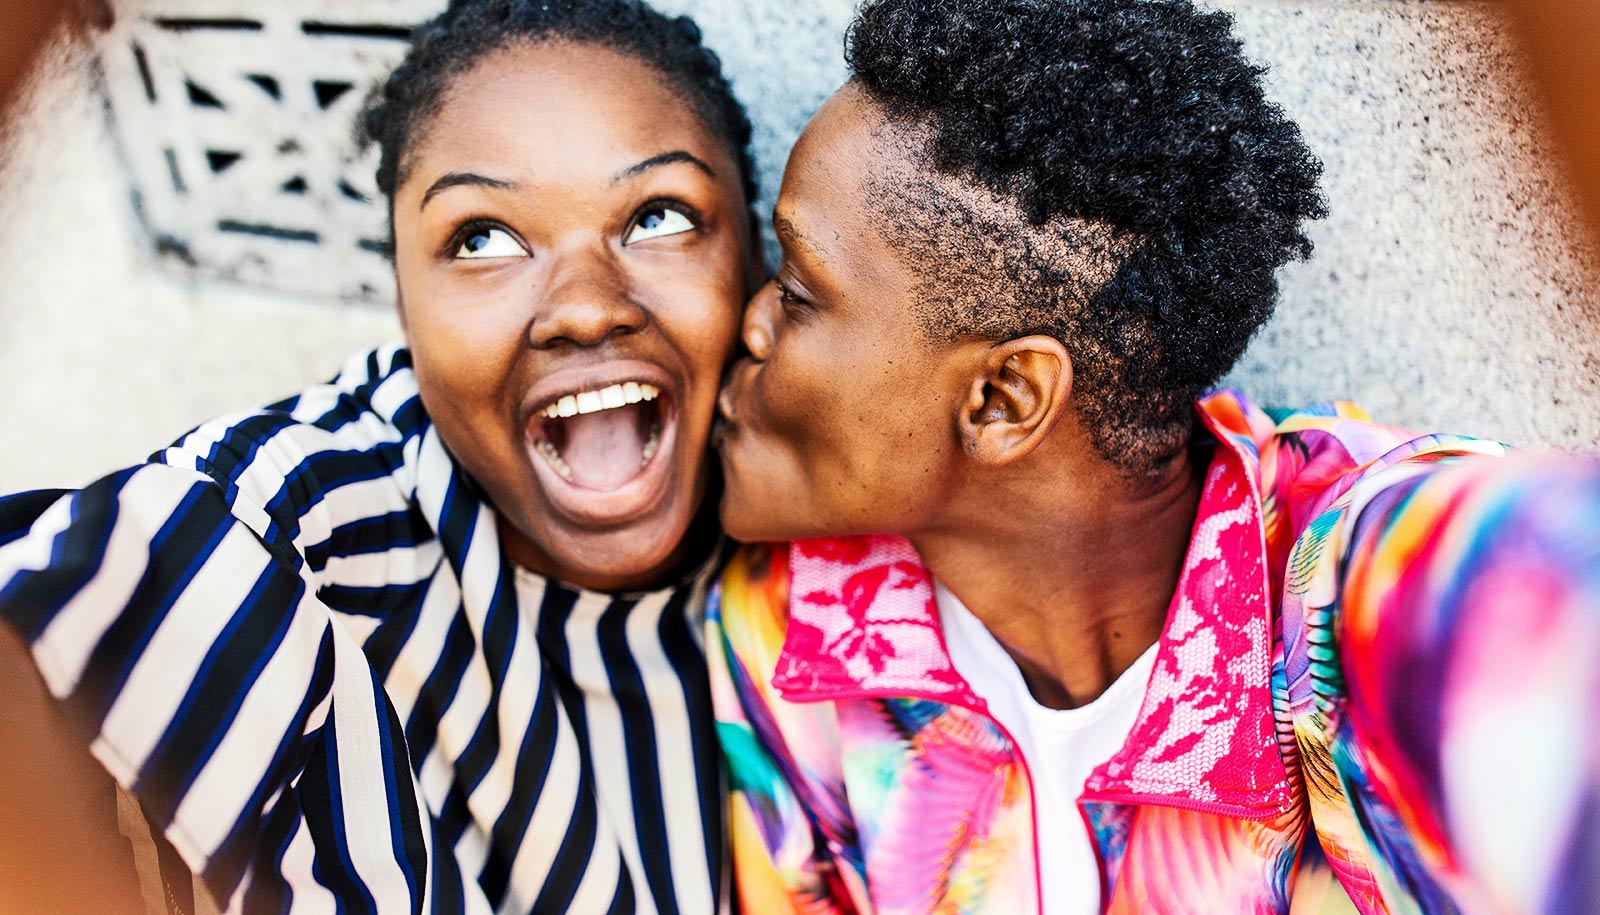 A woman kisses her girlfriend on the cheek while they take a selfie.